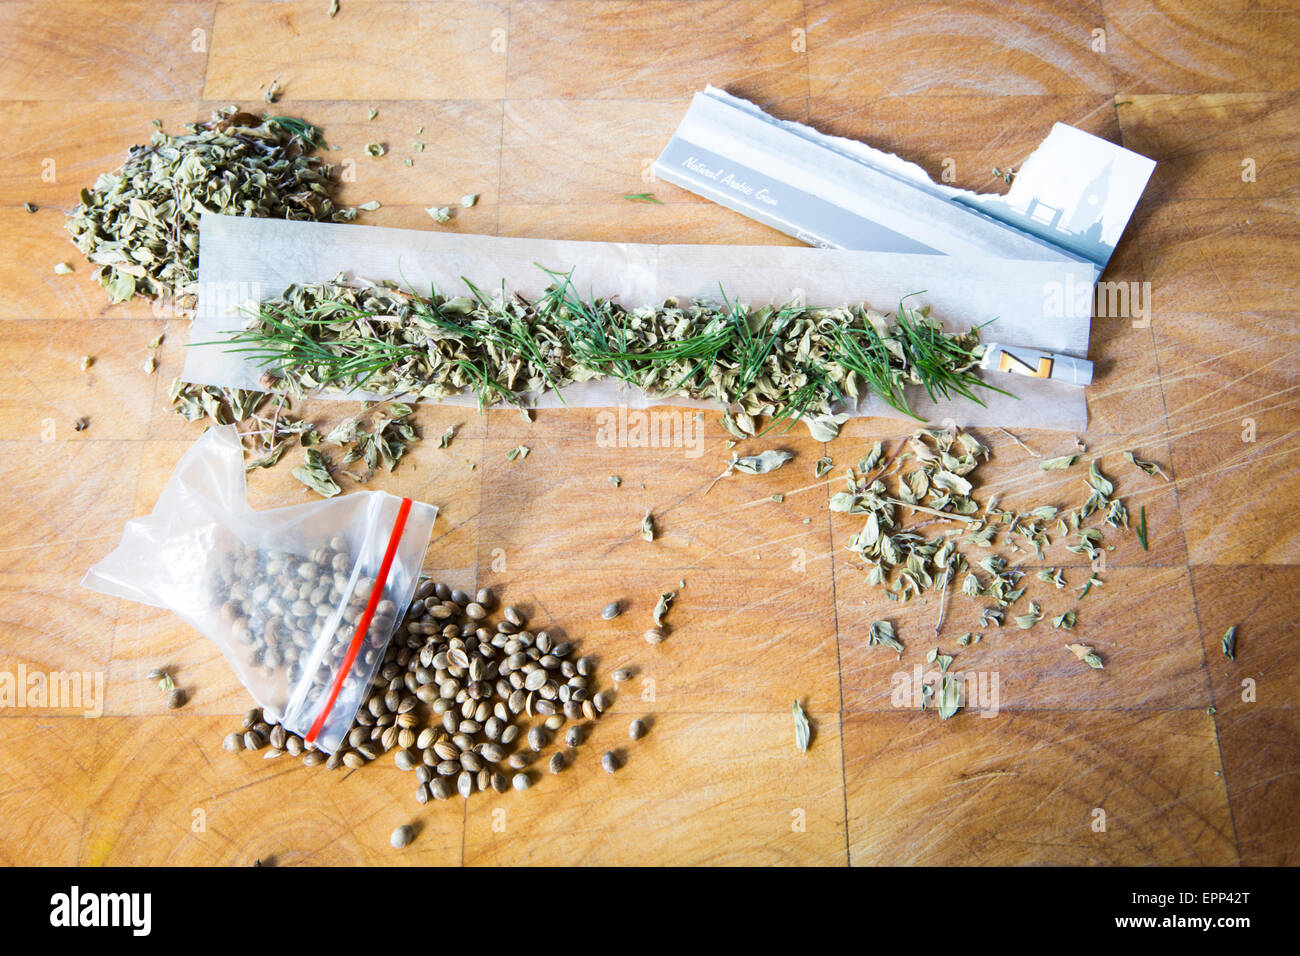 Humorous depiction of a hemp inspired meal featuring hemp seeds, oregano, dill, rizlas. Stock Photo